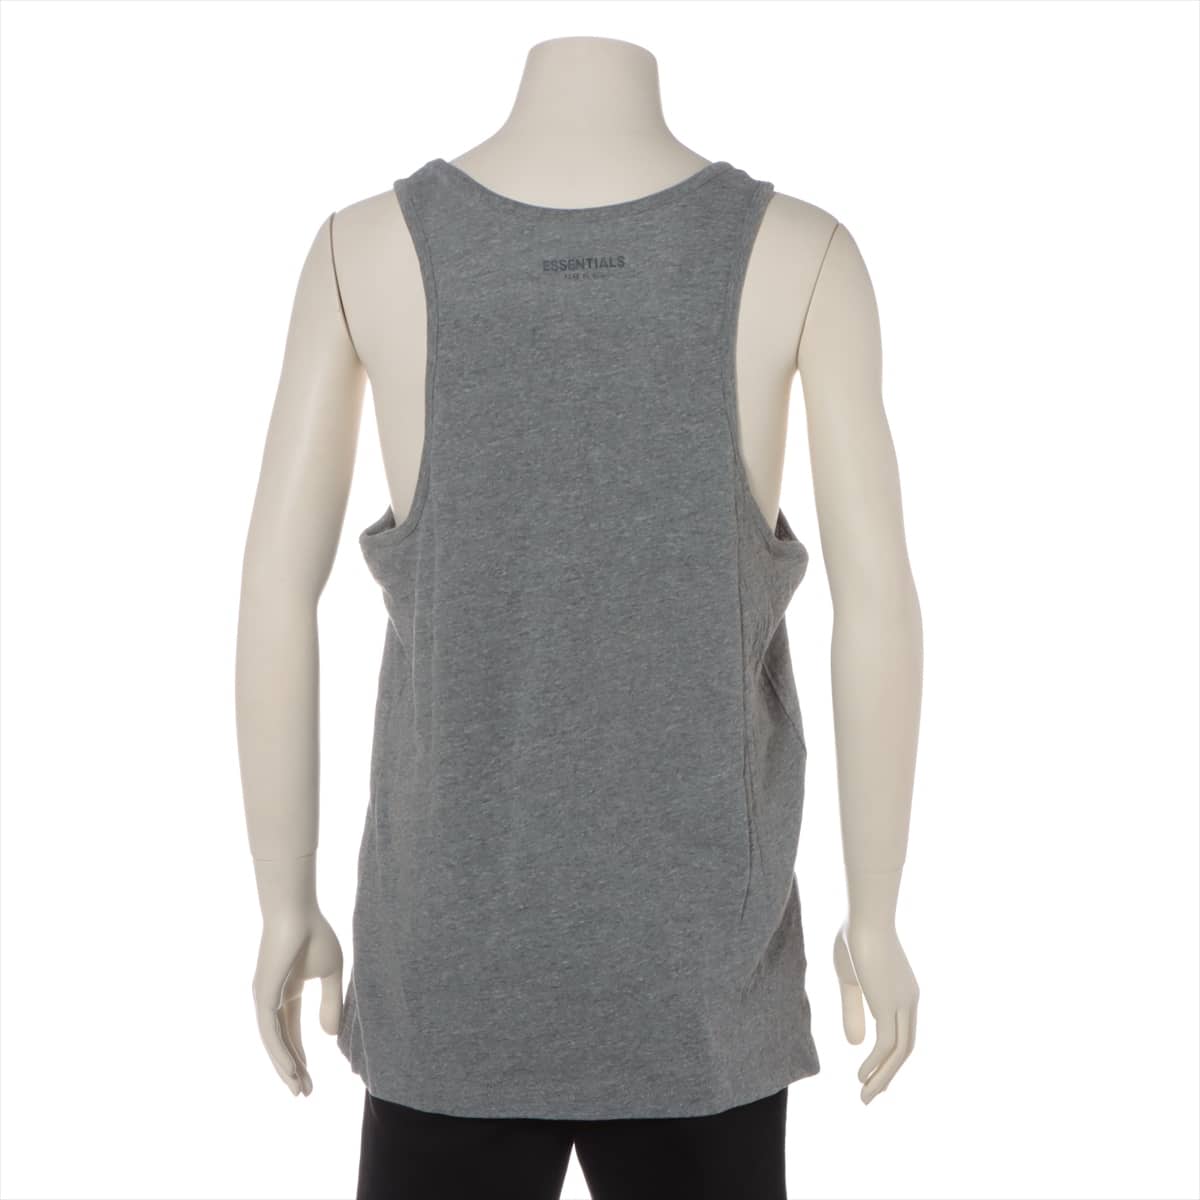 FEAR OF GOD Essentials Cotton & polyester Tank top S Men's Grey